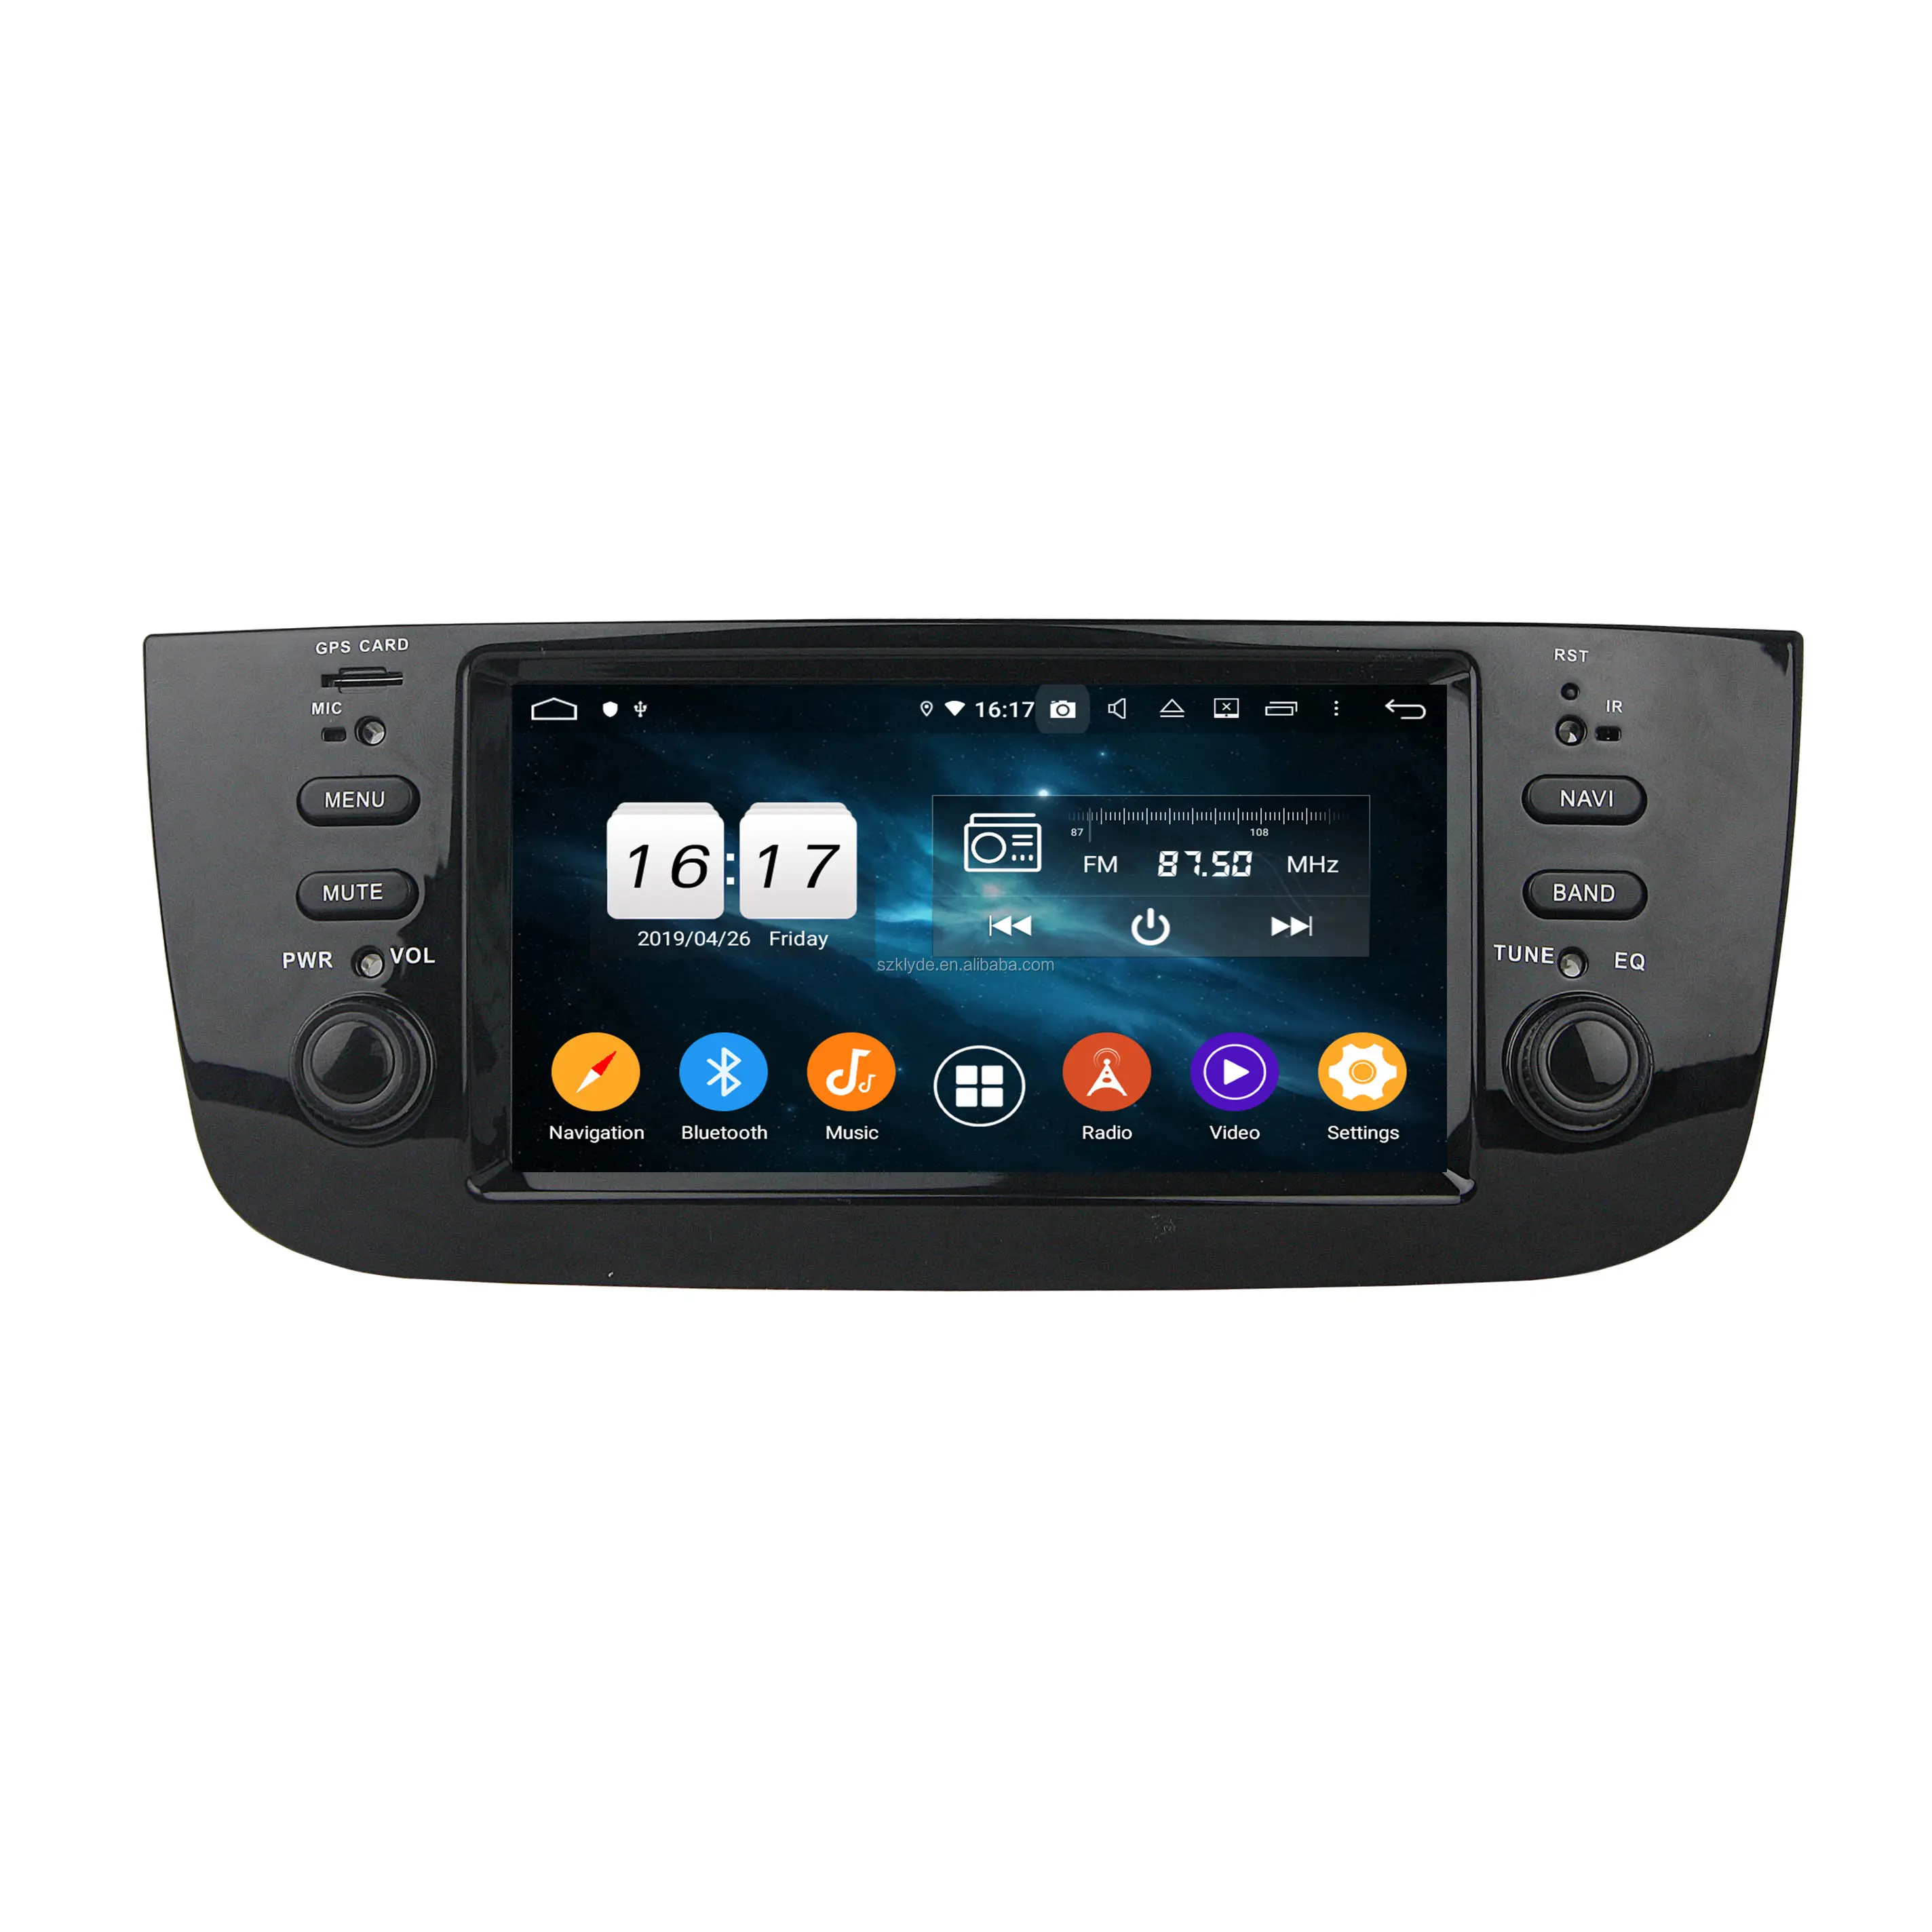 KLYDE KD-6249 4 64G Android 12.0カーオーディオシステム6.2 "GPSナビゲーションforFiat Car for Linea for Grand Punto Evo 2014-2015